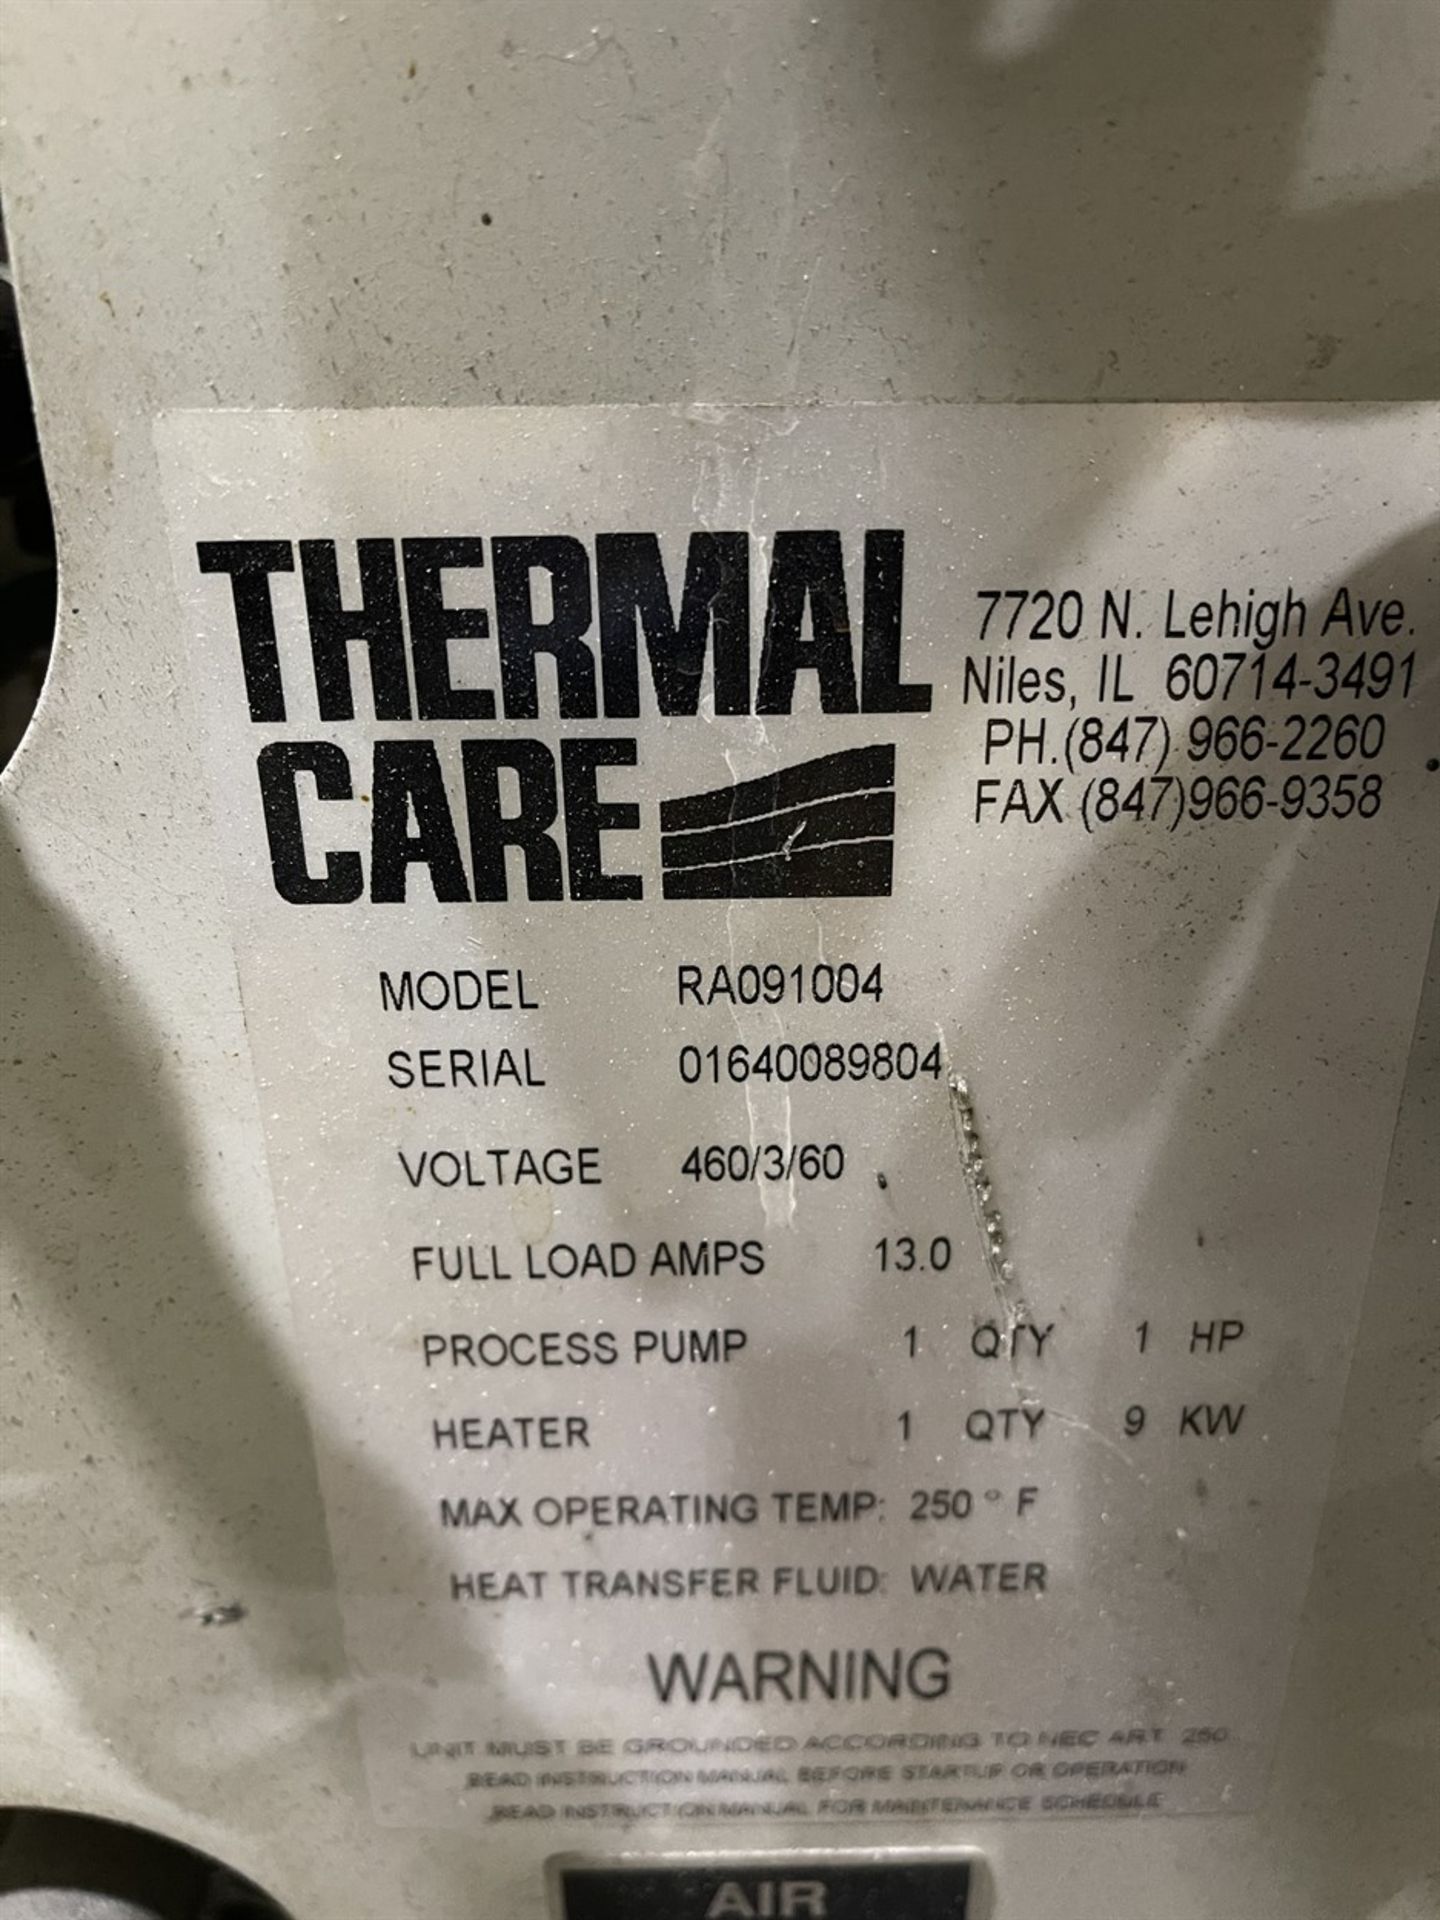 THERMAL CARE Aquatherm RA091004 Temperature Controller, s/n 01640089804 - Image 3 of 3